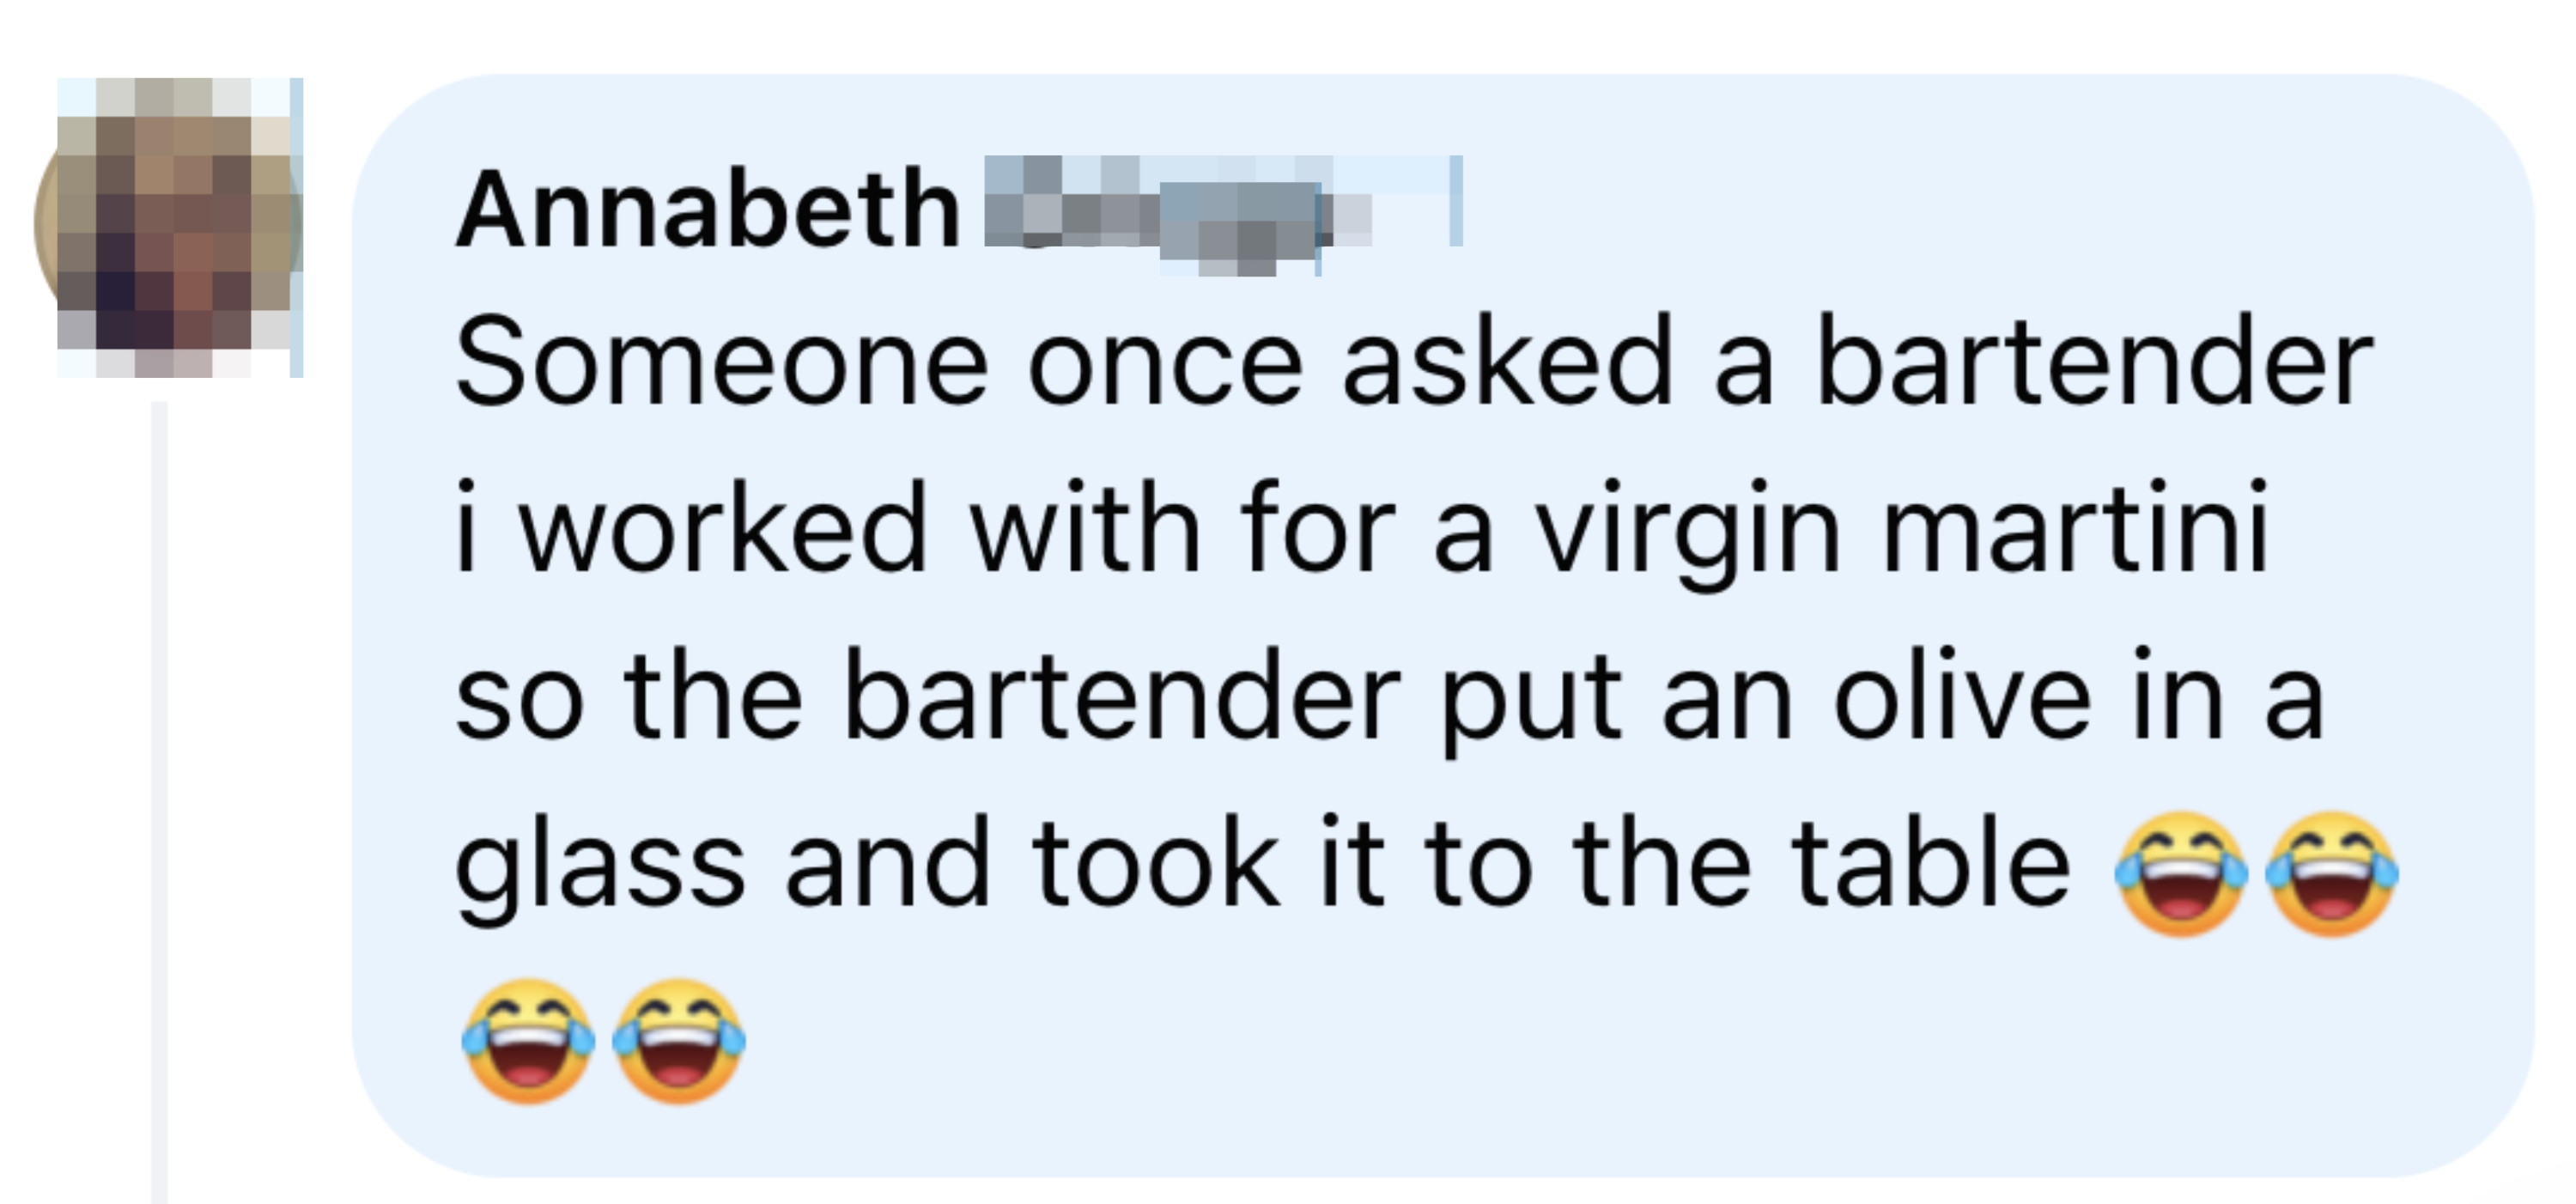 Image of a social media sharing a humorous anecdote about a bartender&#x27;s literal interpretation of a virgin martini order